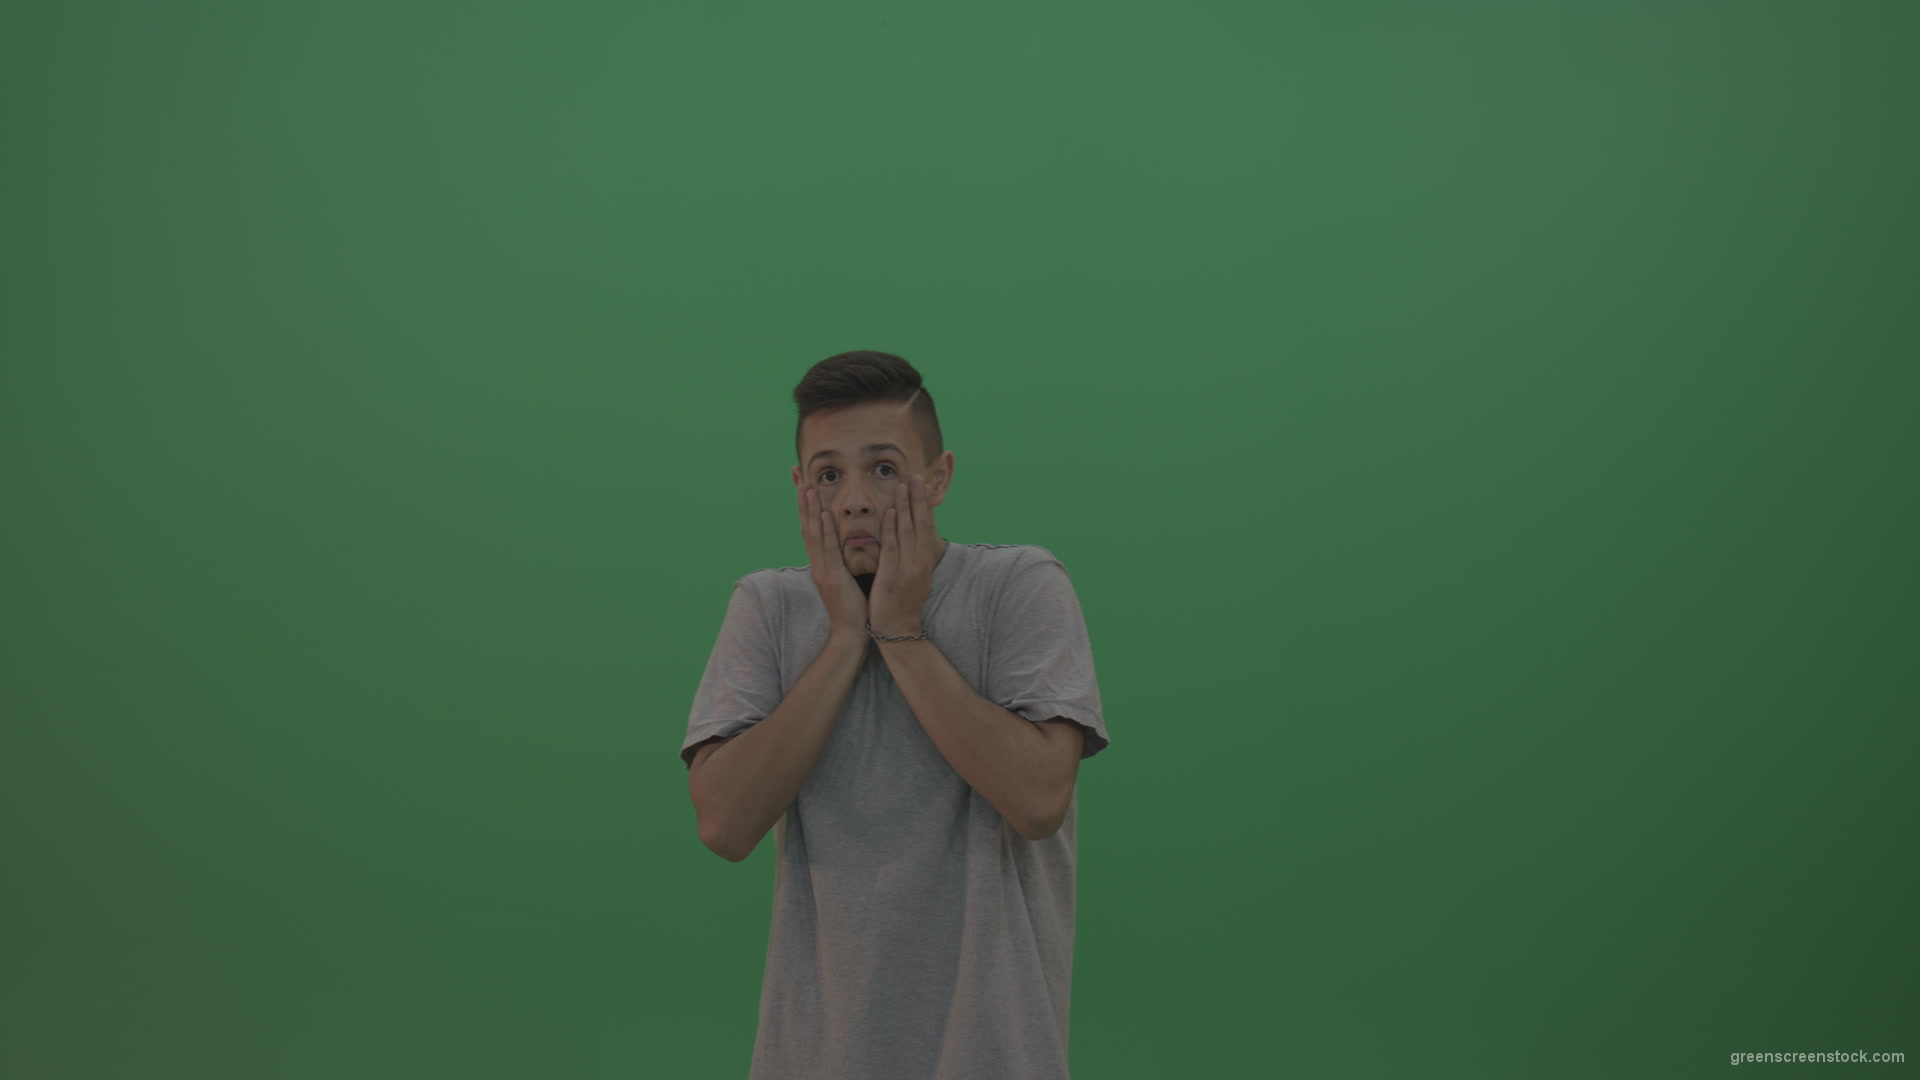 Boy-in-grey-wear-expresses-disappointment-over-green-screen-background_004 Green Screen Stock